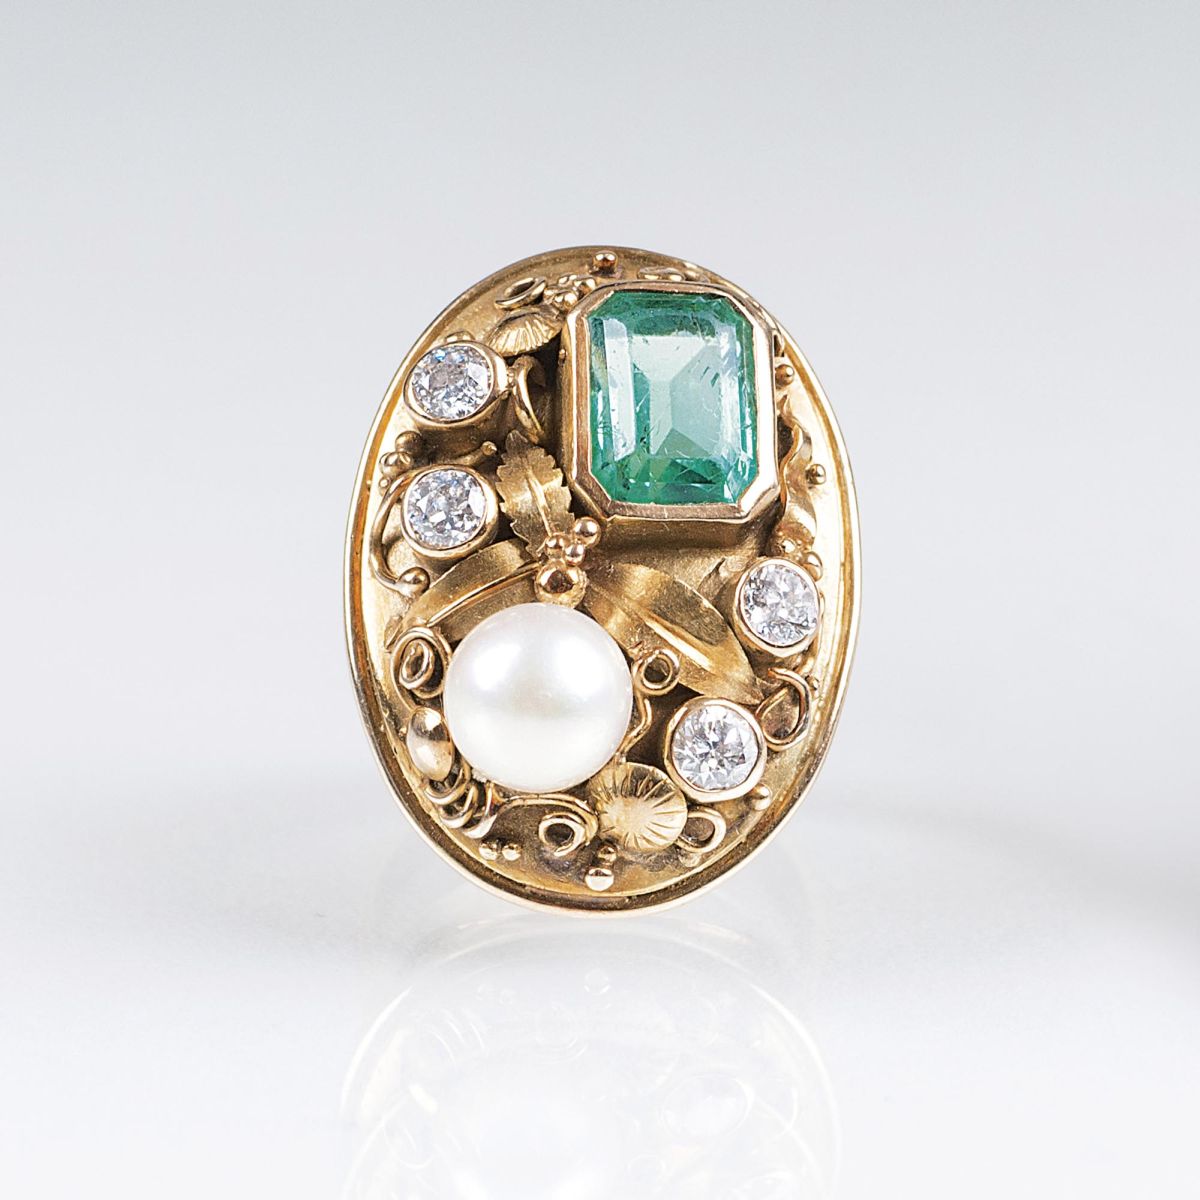 A Vintage Gold Ring with Emerald, Diamond and Pearl